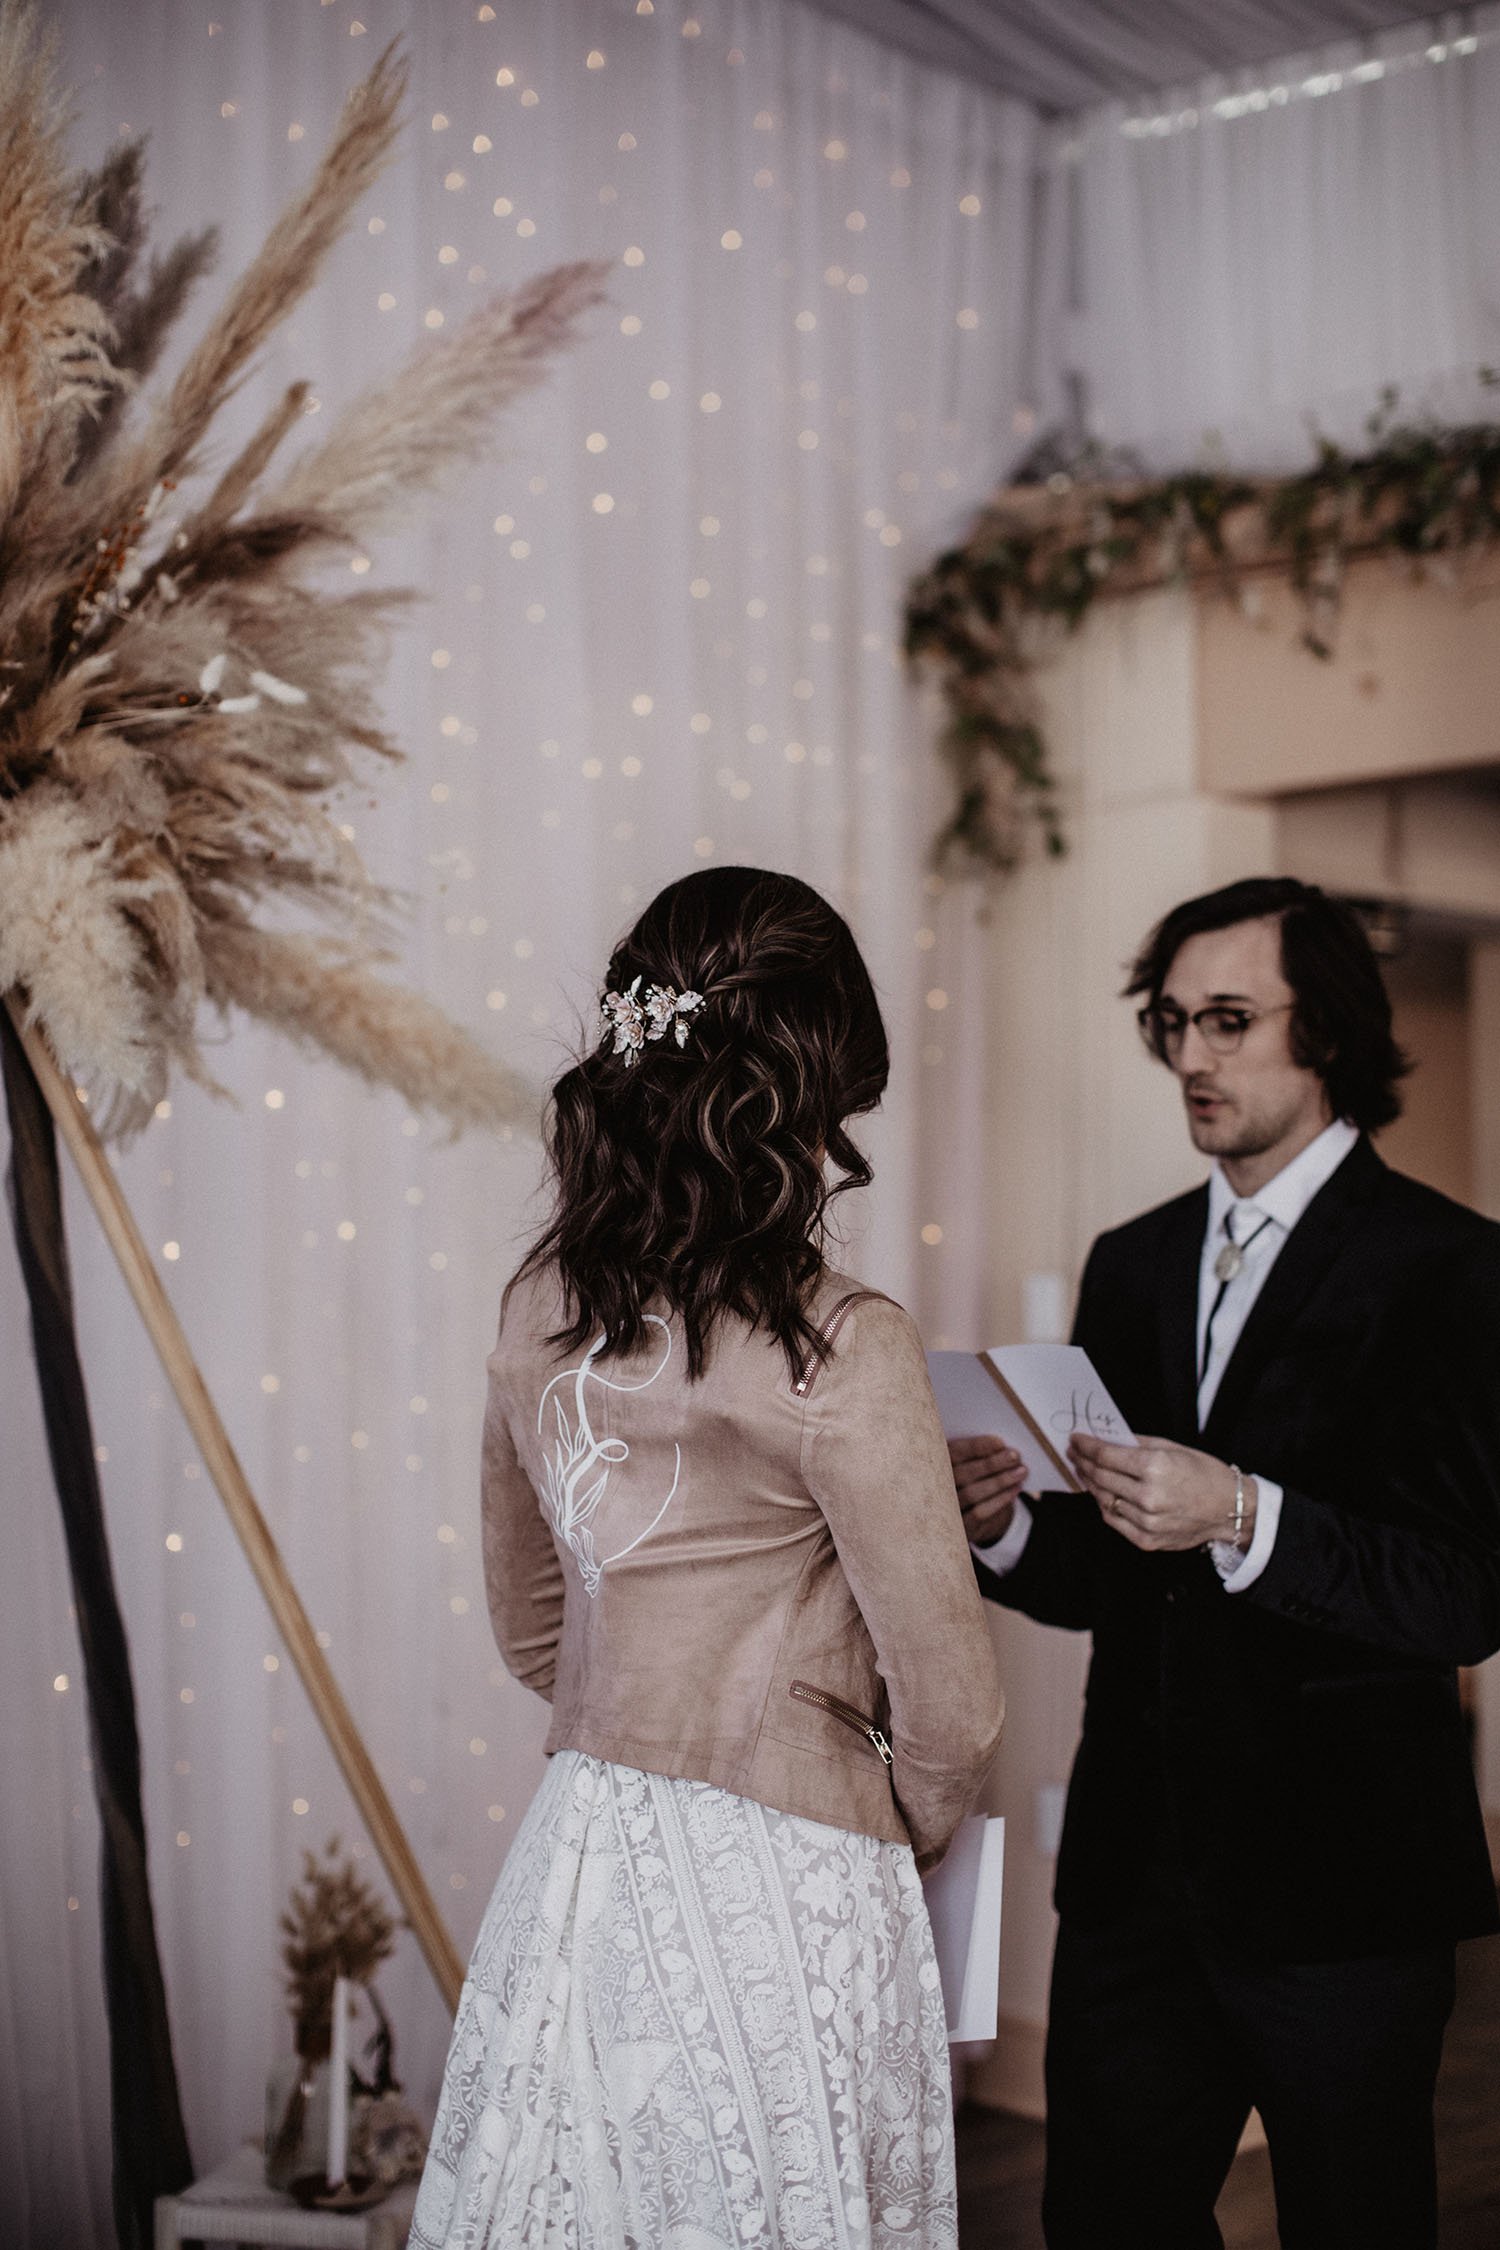  A bride wearing Rue de Seine Kyara wedding dress and a brown suede jacket with a monogram ‘E’ and florals painted on the back. Her hair is half up in soft curls with a hair comb of gold and ivory. She is standing with her back to the camera facing t